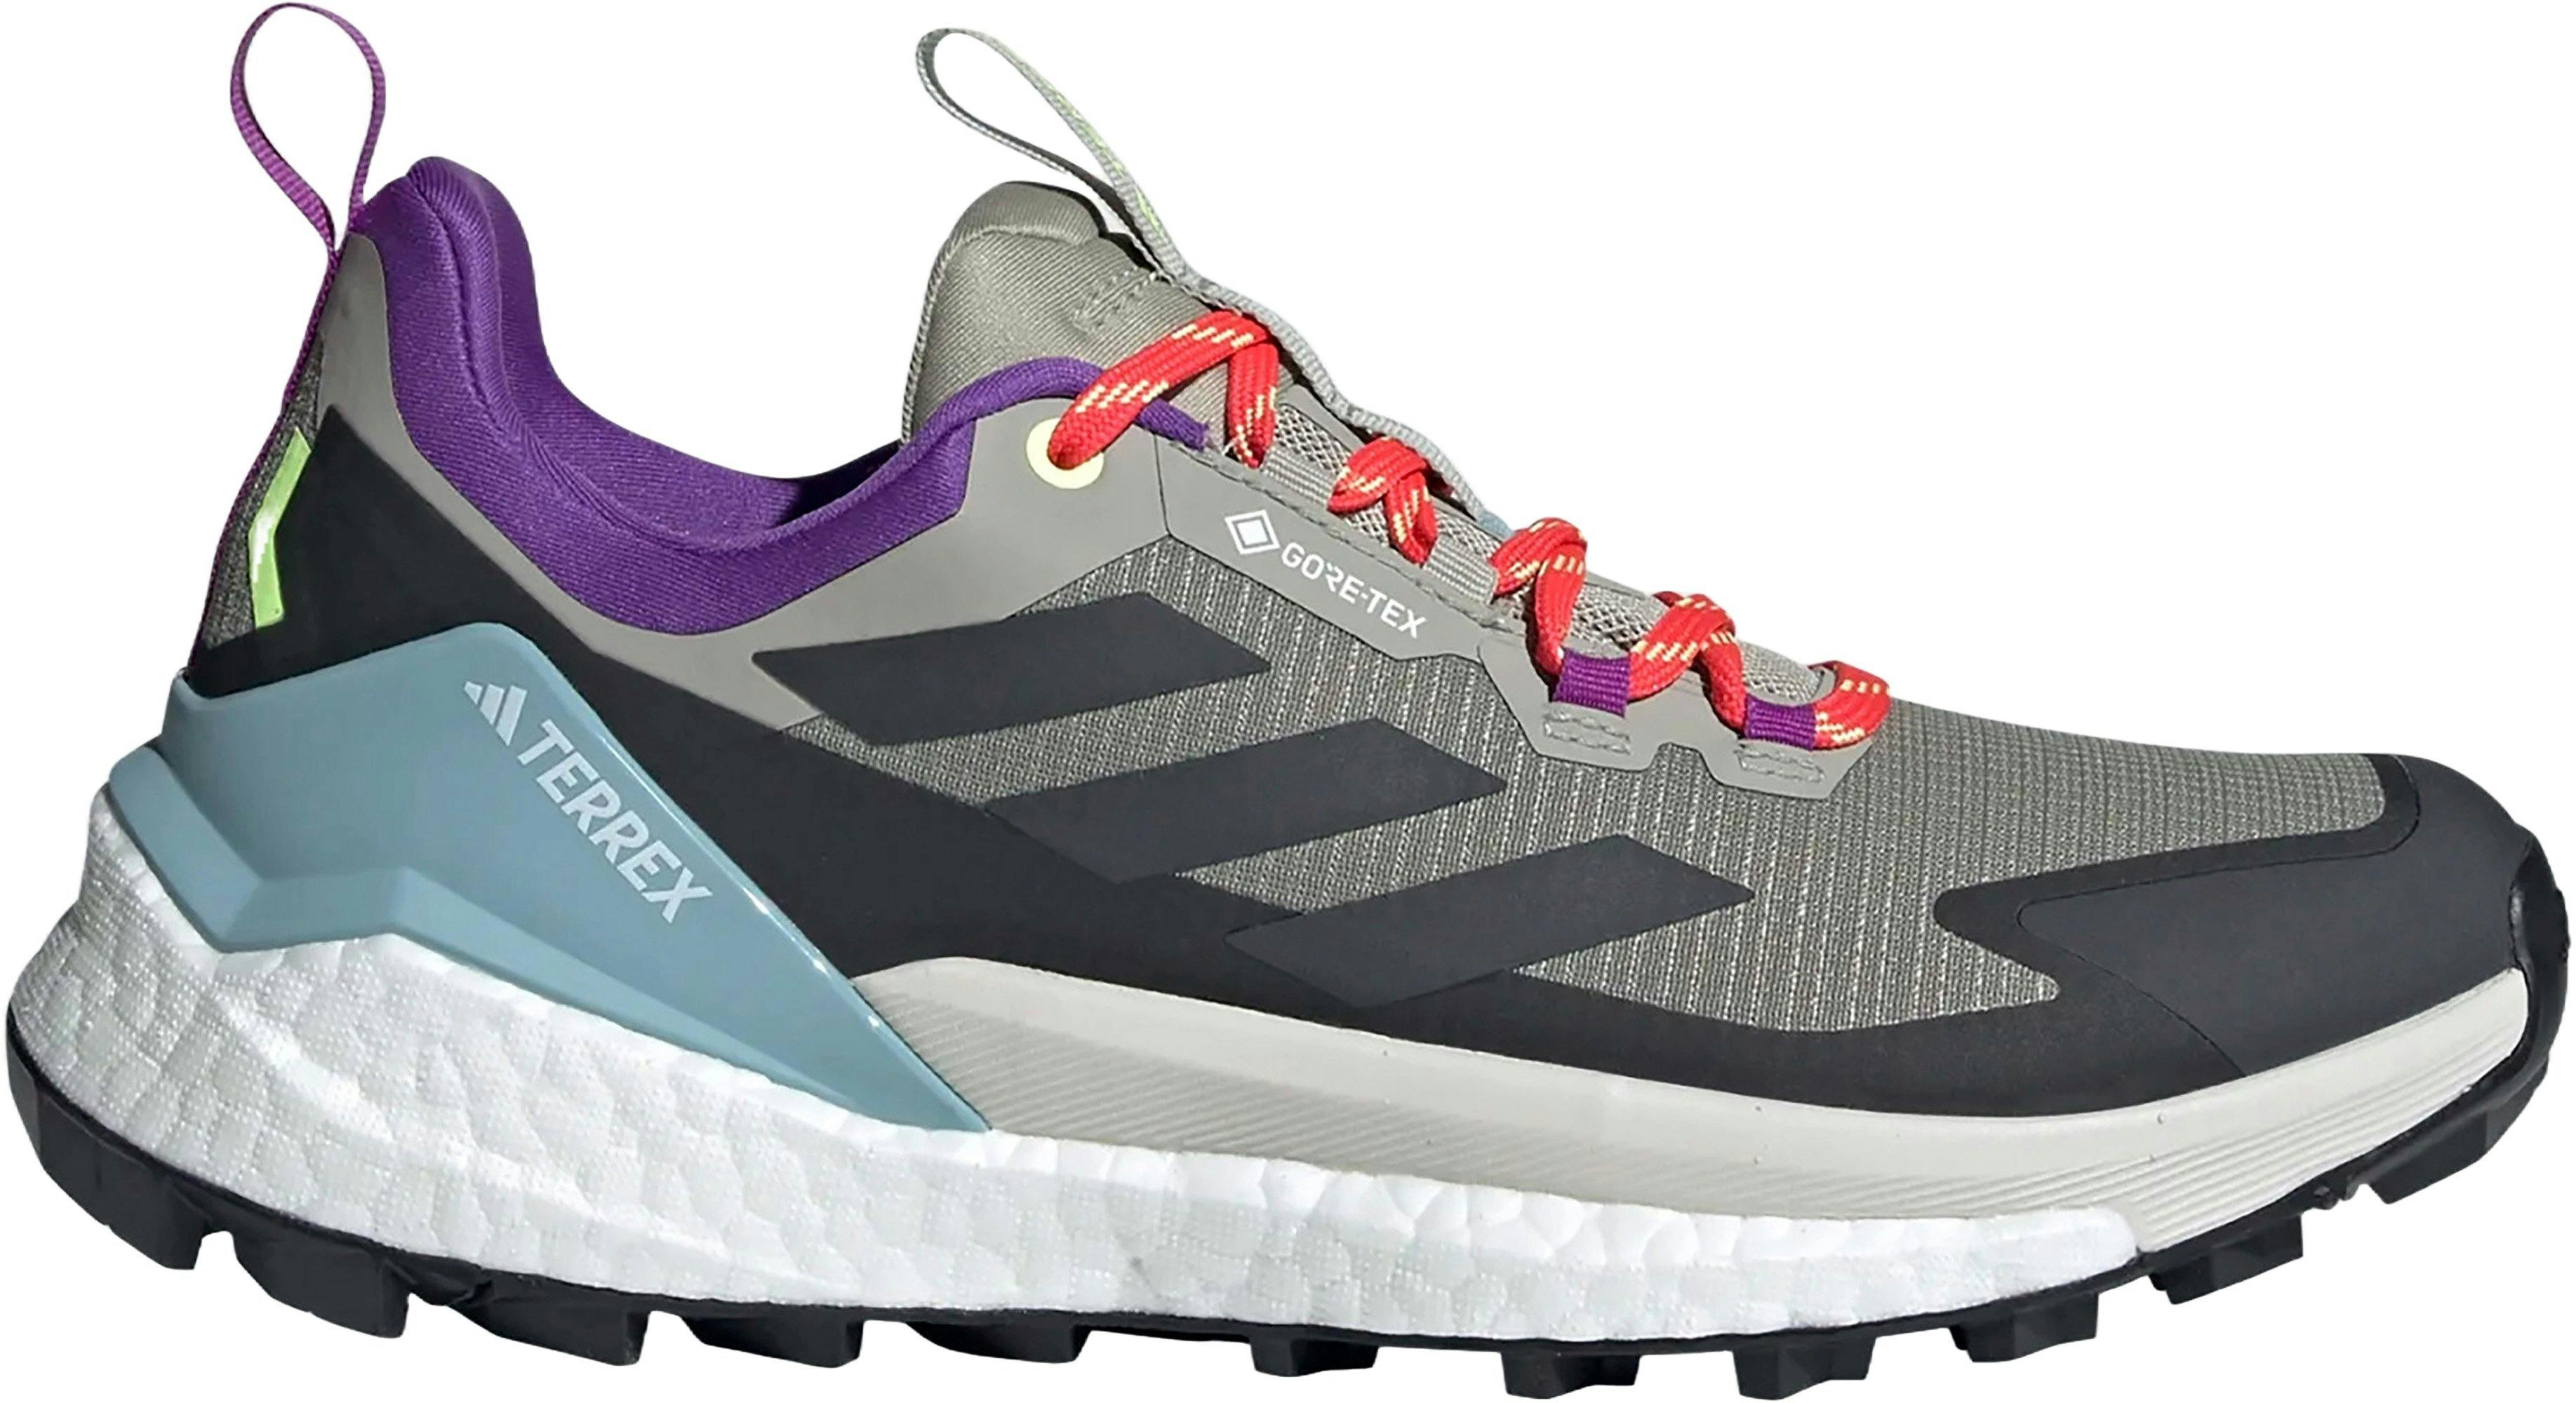 Product image for Terrex Free Hiker 2 Low Gore-Tex Shoes - Women's